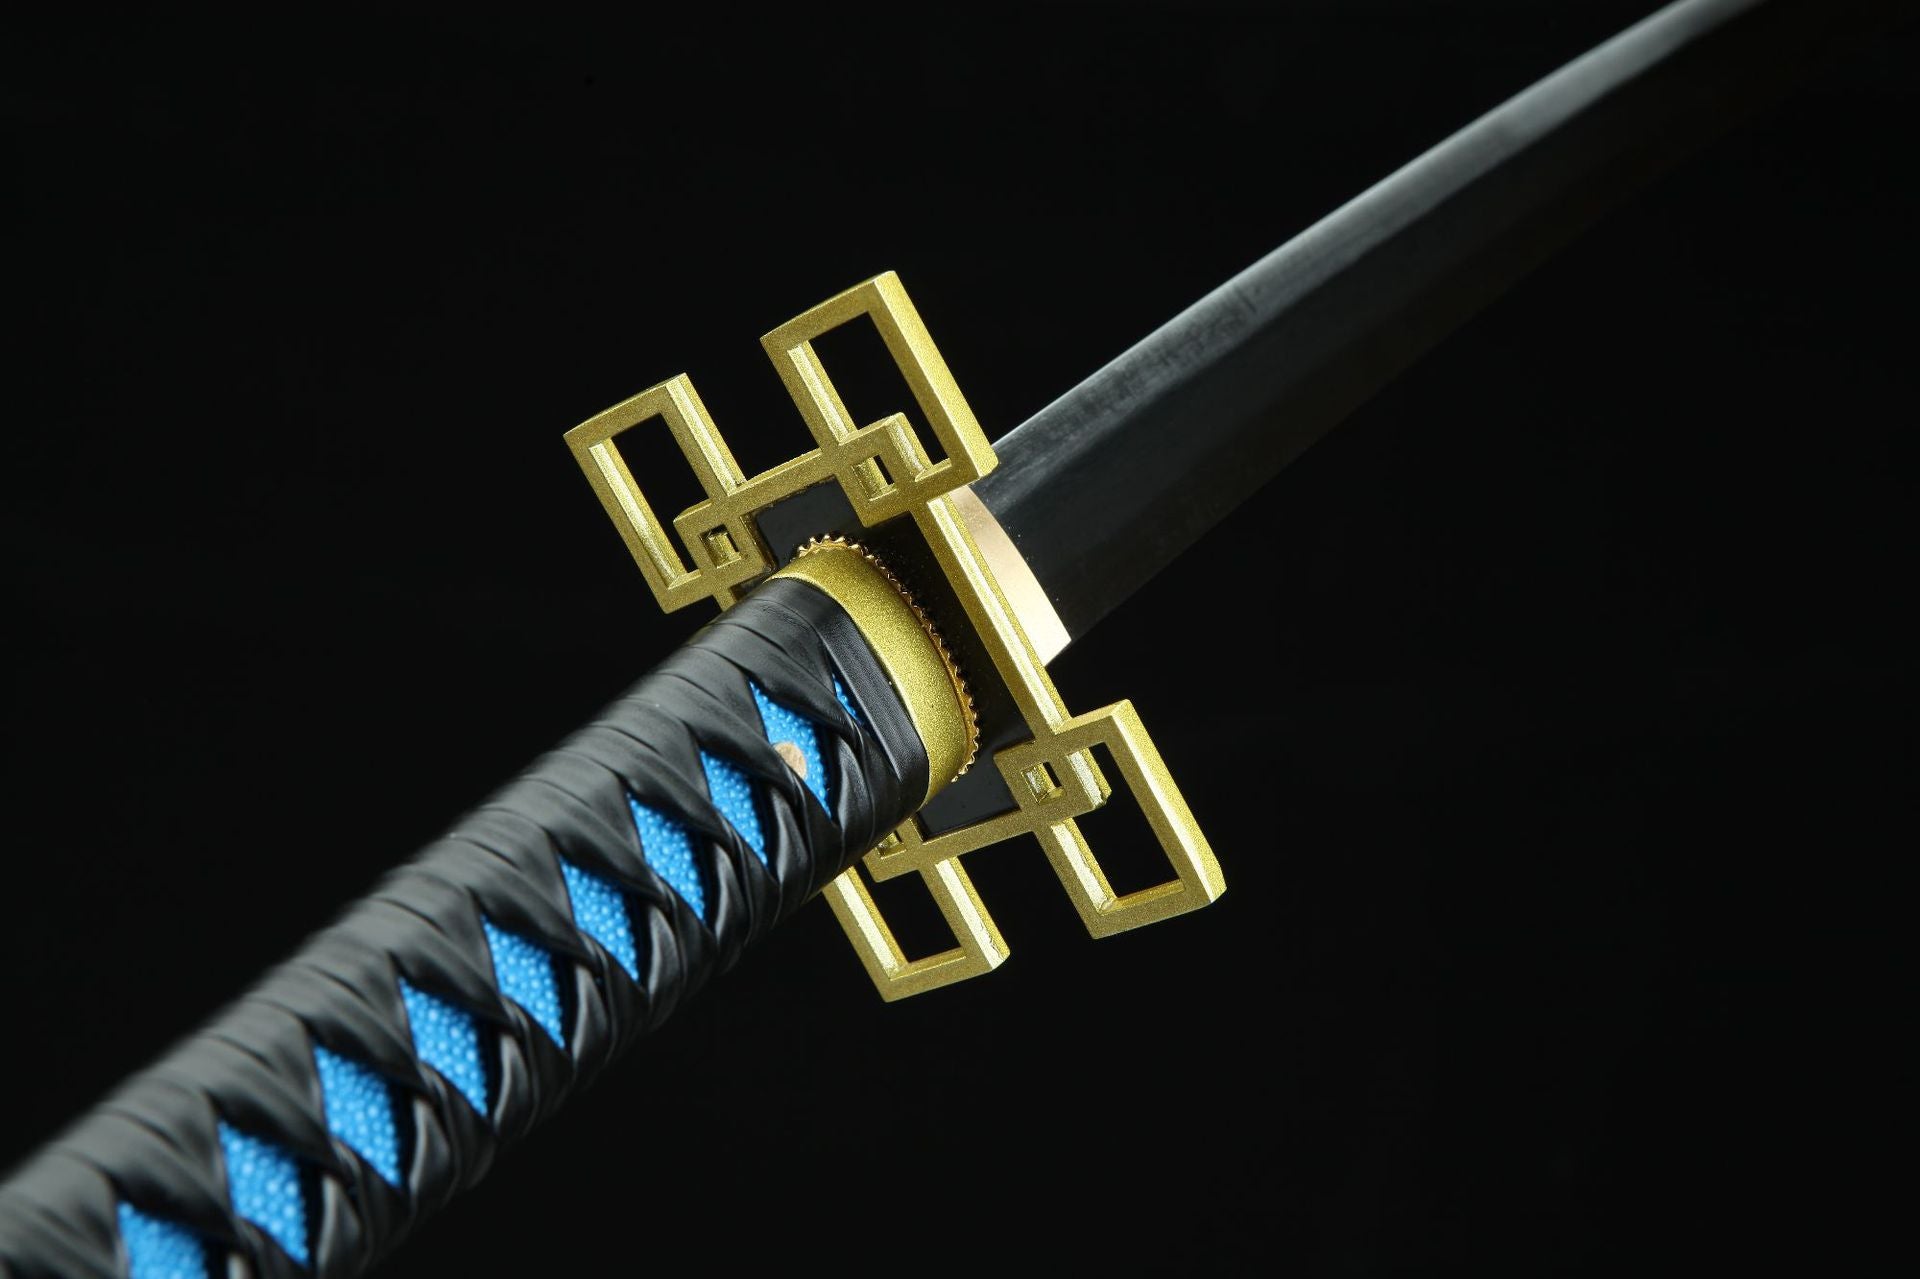  A close-up shot of the tsuba on Muichiro's sword from the hilt side